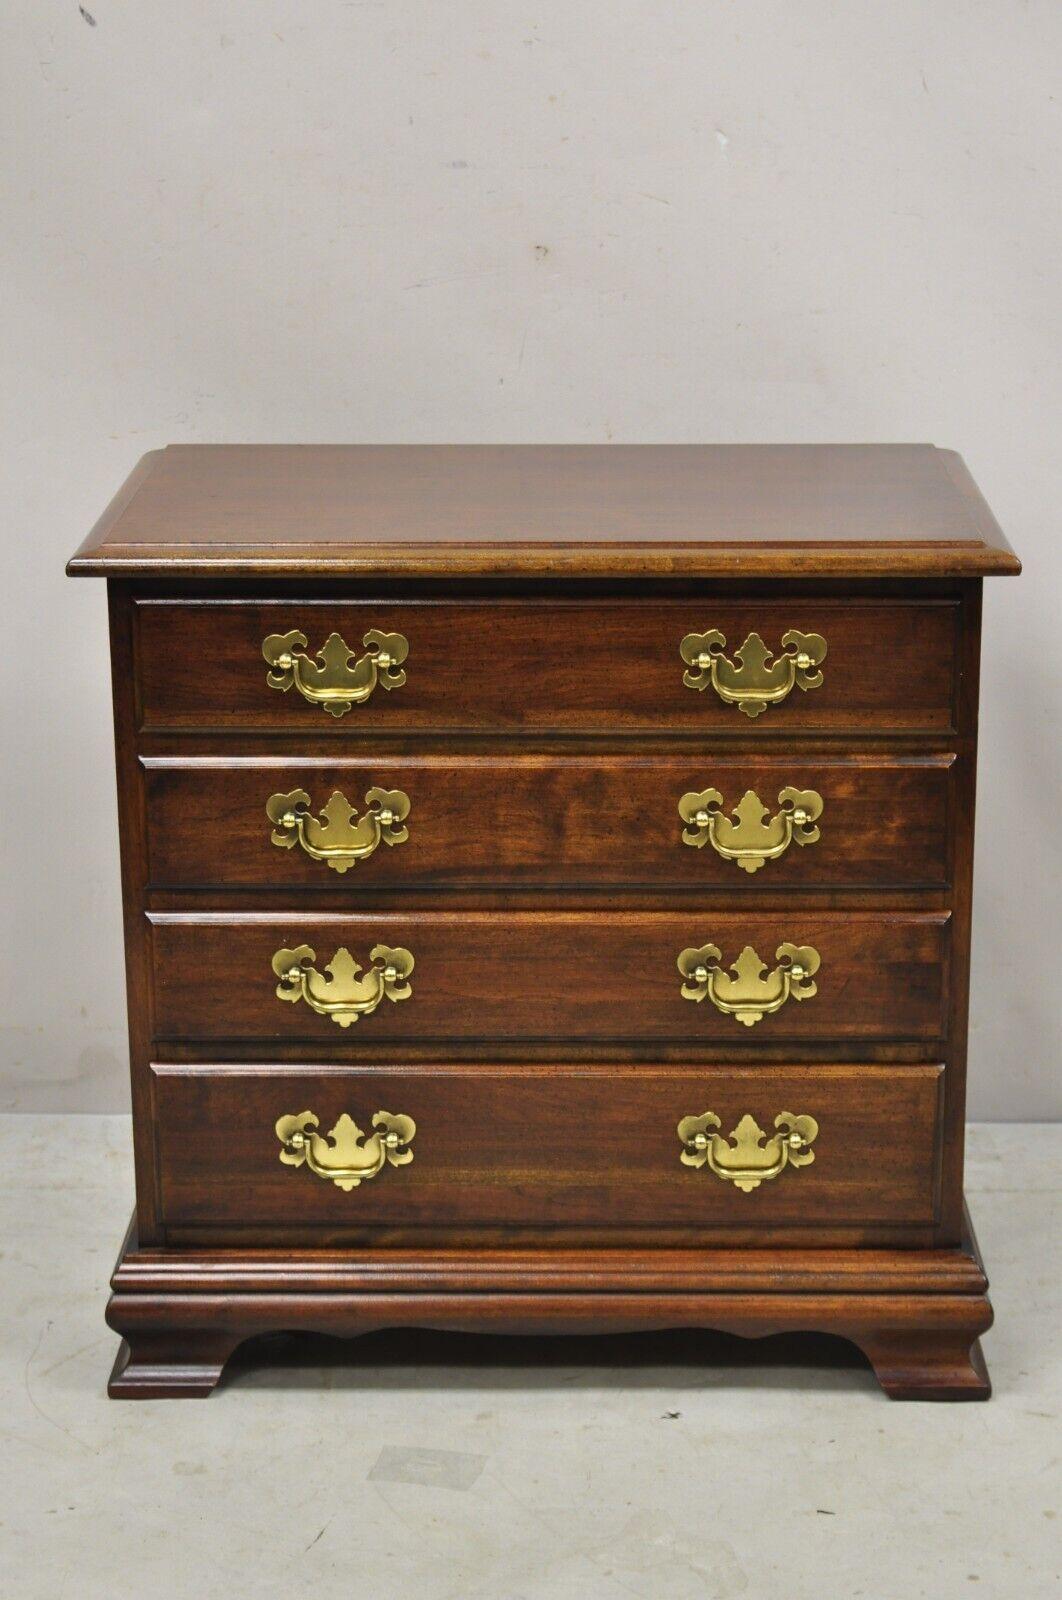 Vintage Chippendale Style Small 4 Drawer Bachelor Chest Cherry Nightstand Side Table. Item features solid wood construction, beautiful wood grain, 4 dovetailed drawers, solid brass hardware, quality American craftsmanship. Circa Late 20th Century.